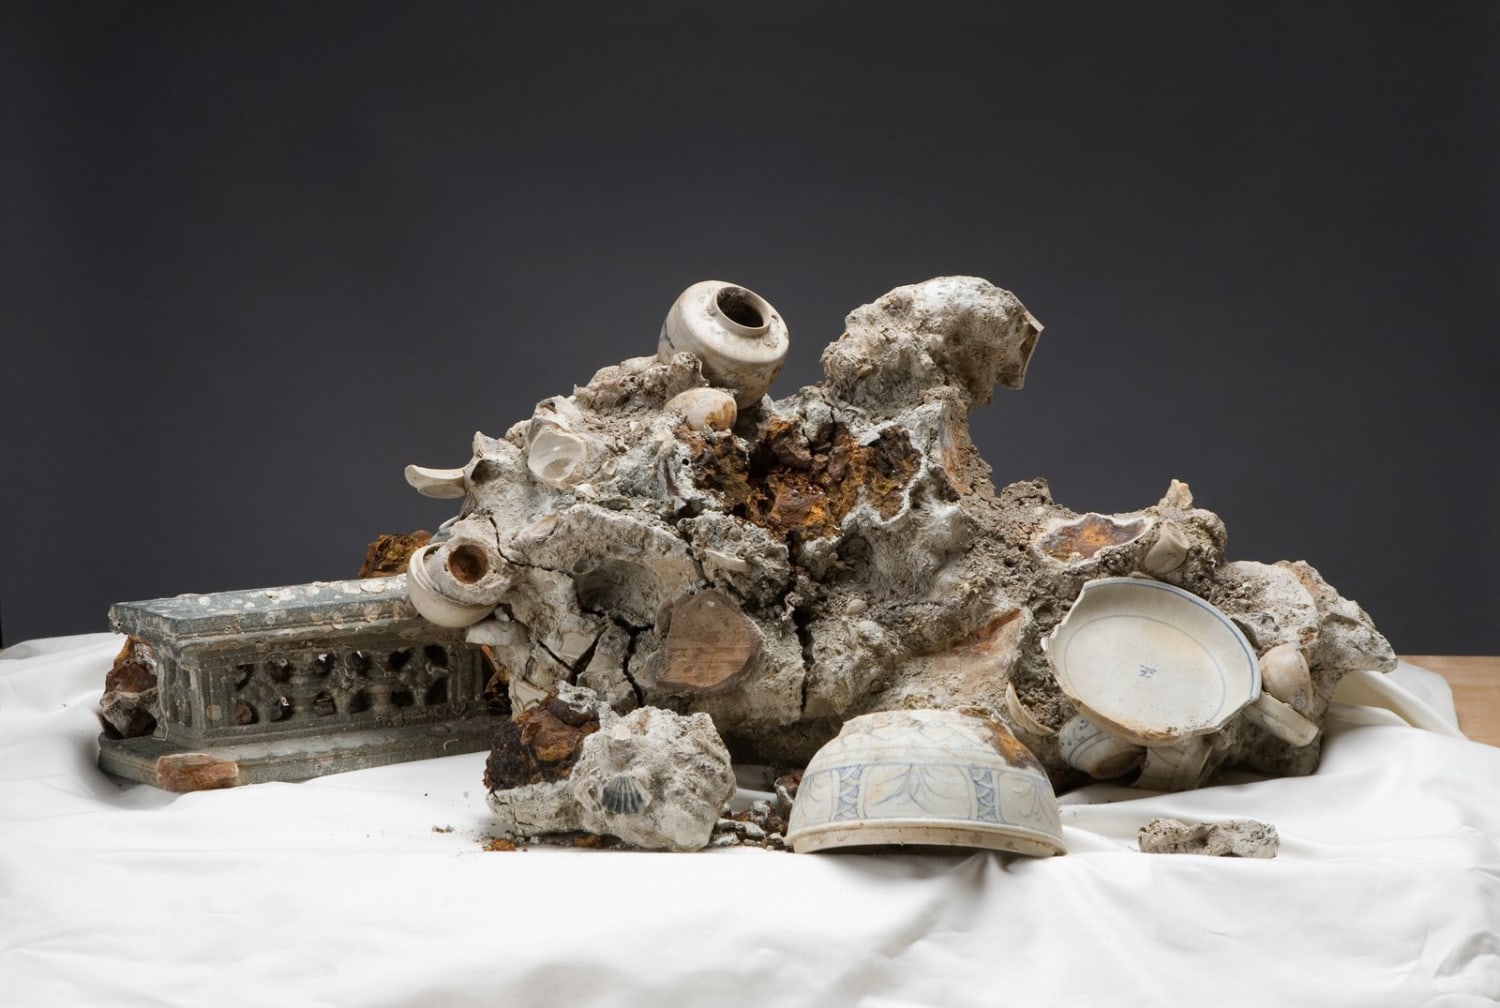 Who Owns the Art Recovered From Shipwrecks?